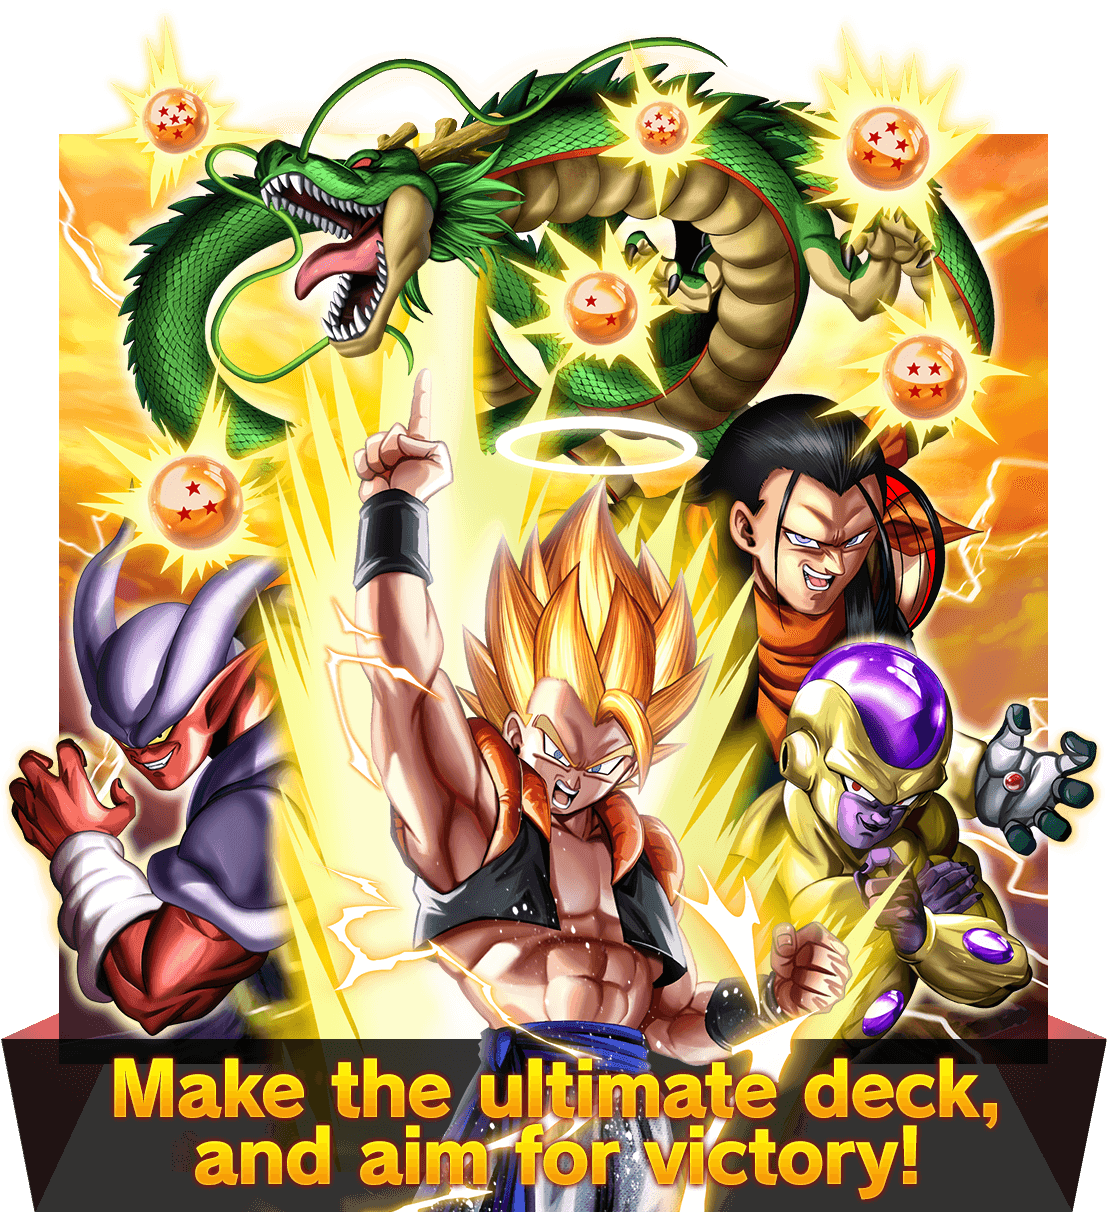 Make the ultimate deck, and aim for victory!